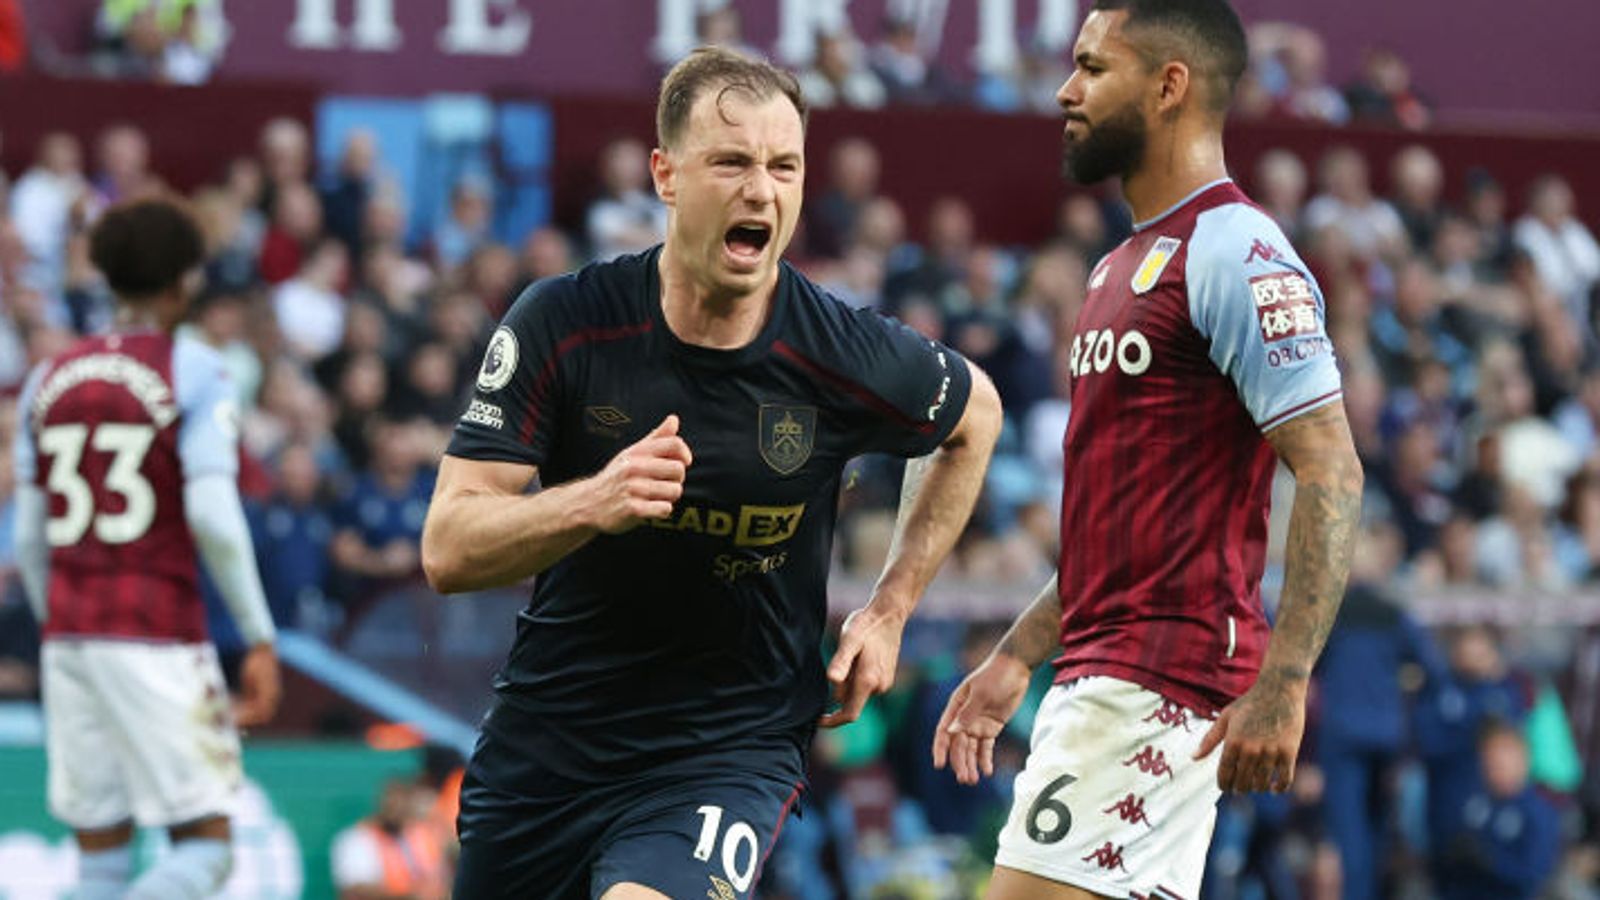 Ashley Barnes: Burnley striker claims Premier League refs want to see Clarets relegated due to ‘ugly’ playing style